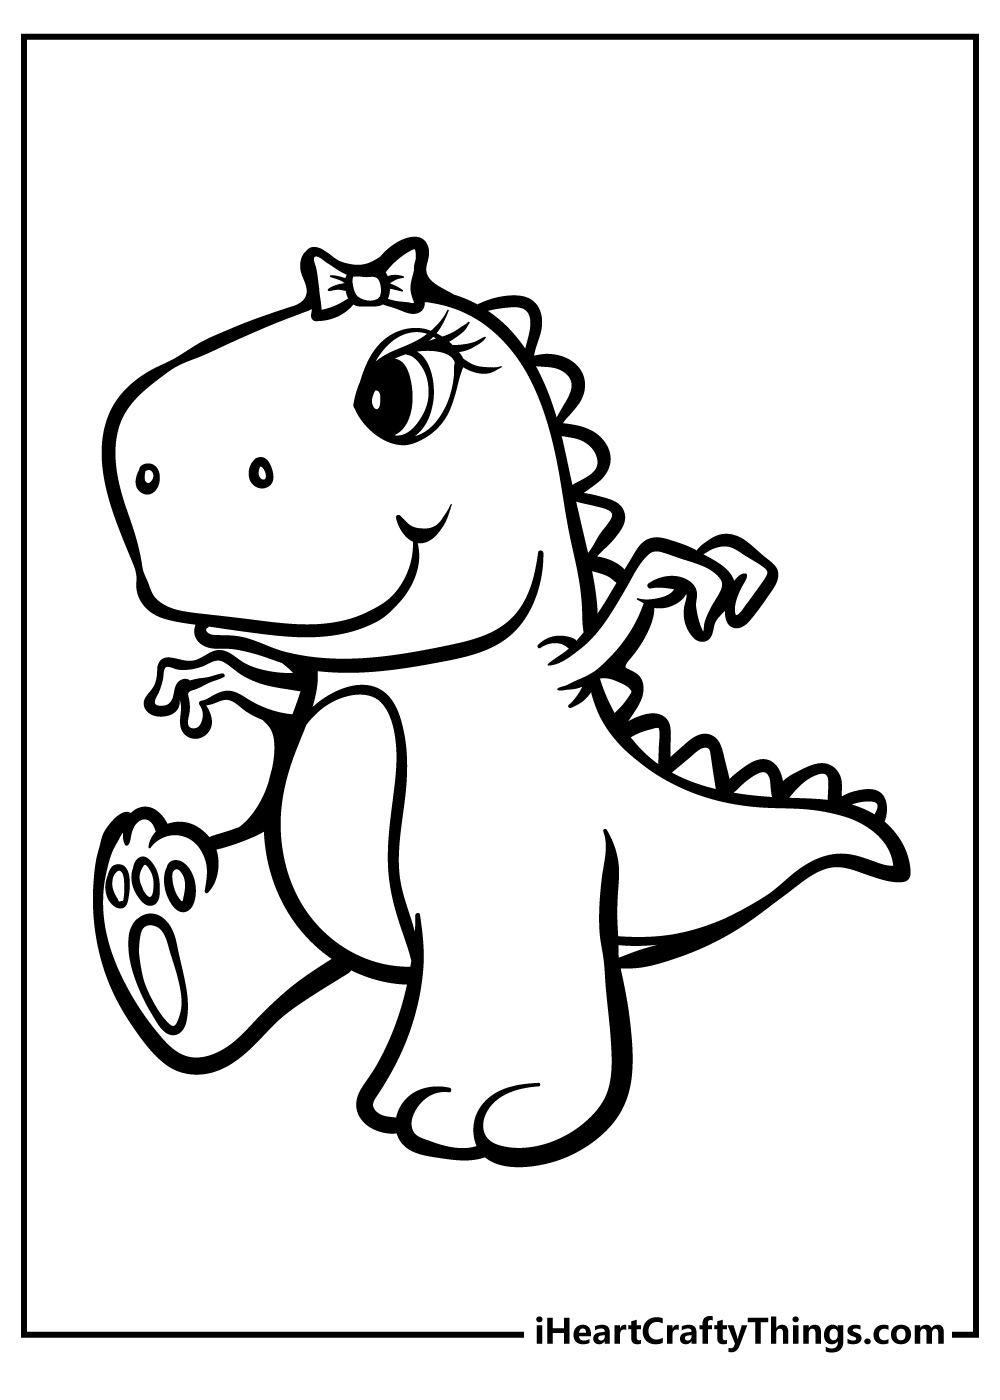 Baby Dinosaur Coloring Pages for kids free download